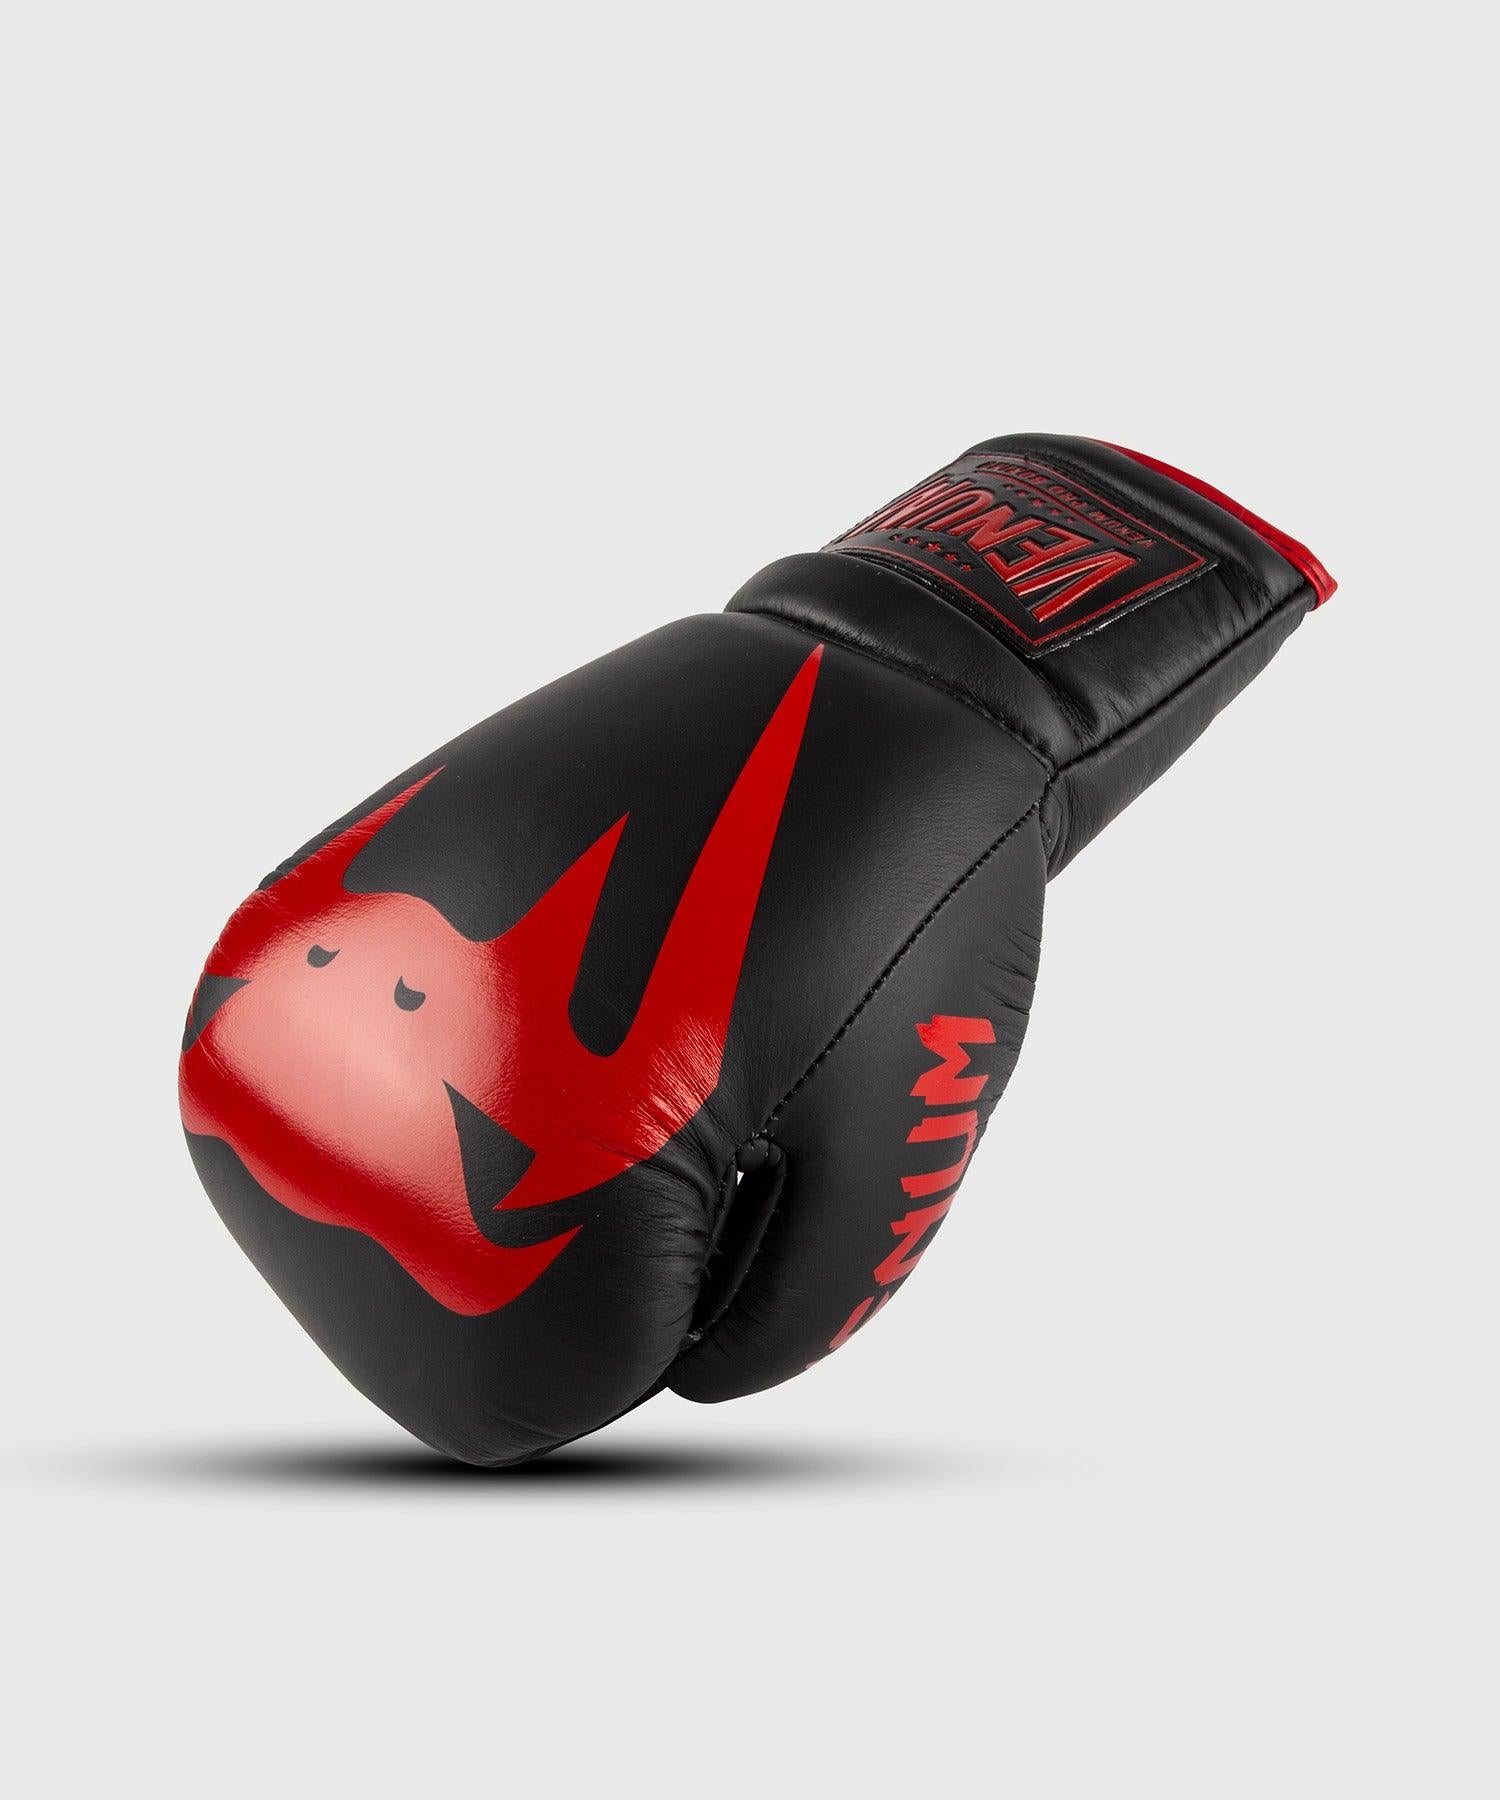 Venum Giant 2.0 Pro Boxing Gloves - With Laces - Black/Red Picture 1